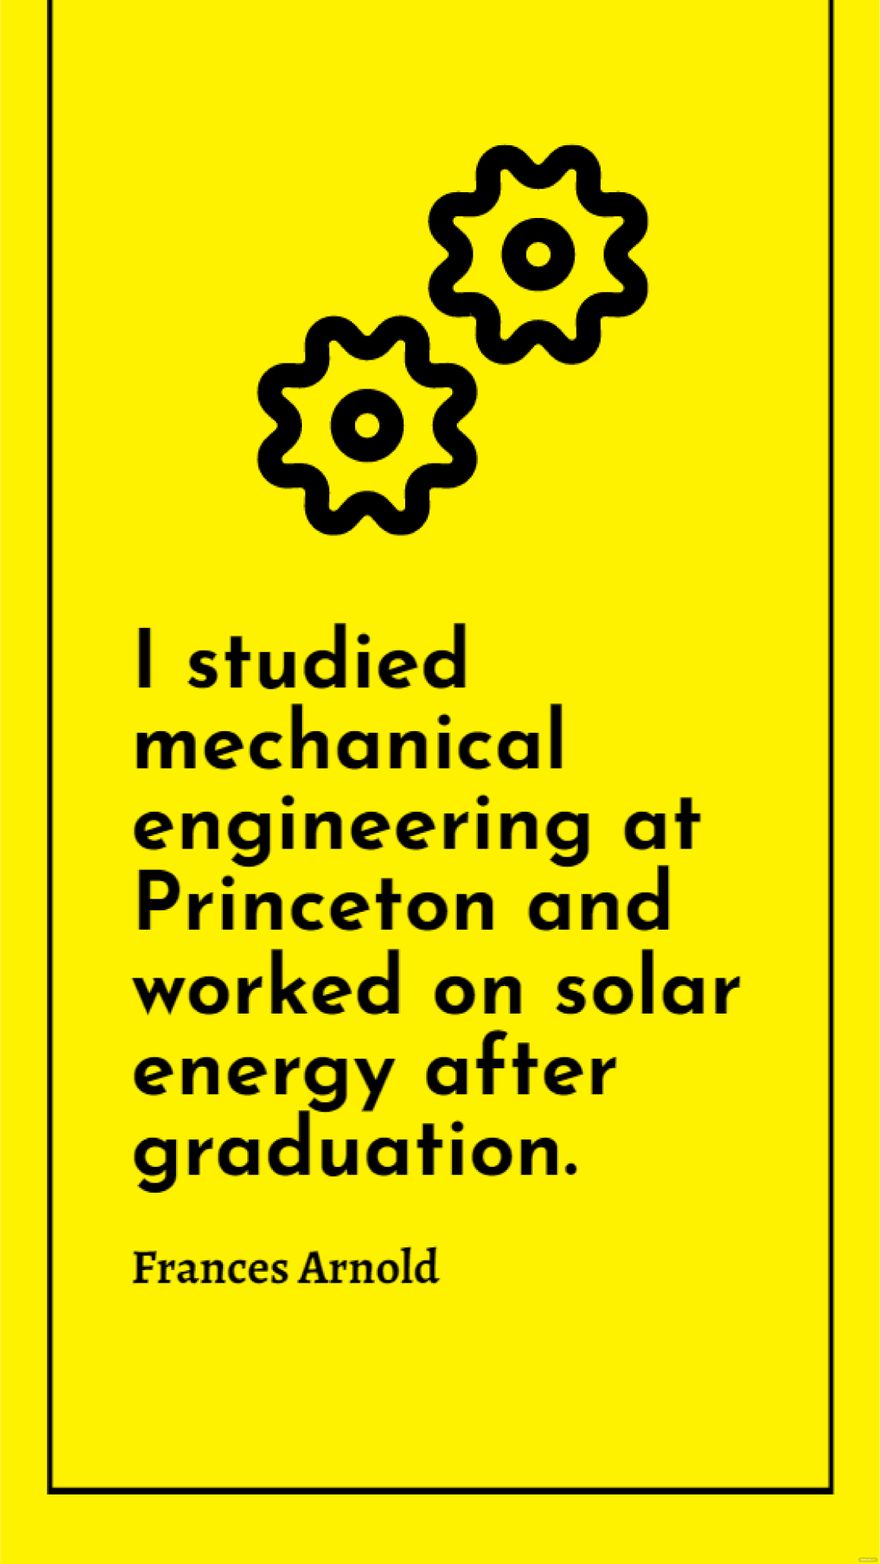 Free Frances Arnold - I studied mechanical engineering at Princeton and worked on solar energy after graduation. in JPG